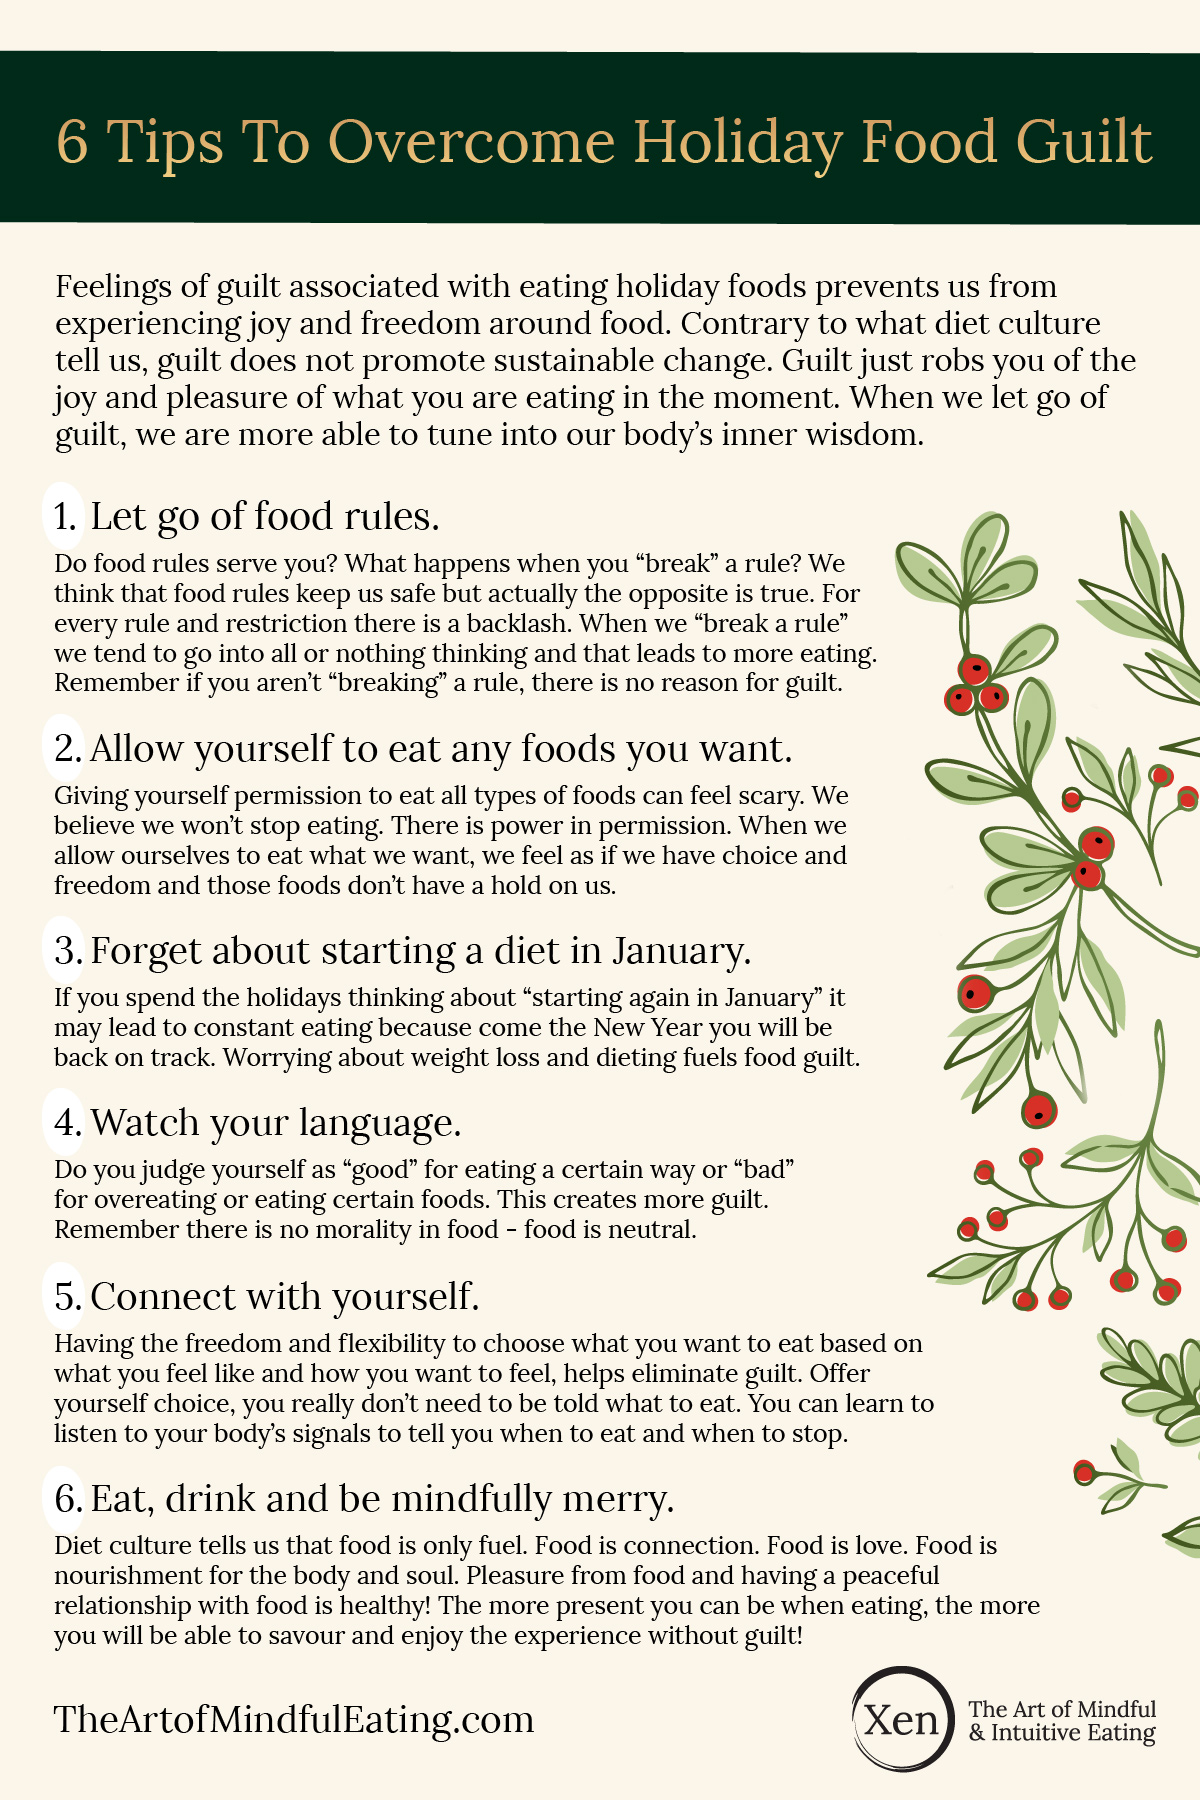 https://www.theartofmindfuleating.com/wp-content/uploads/2022/12/6-Tips-To-Overcome-Holiday-Food-Guilt-Web.jpg